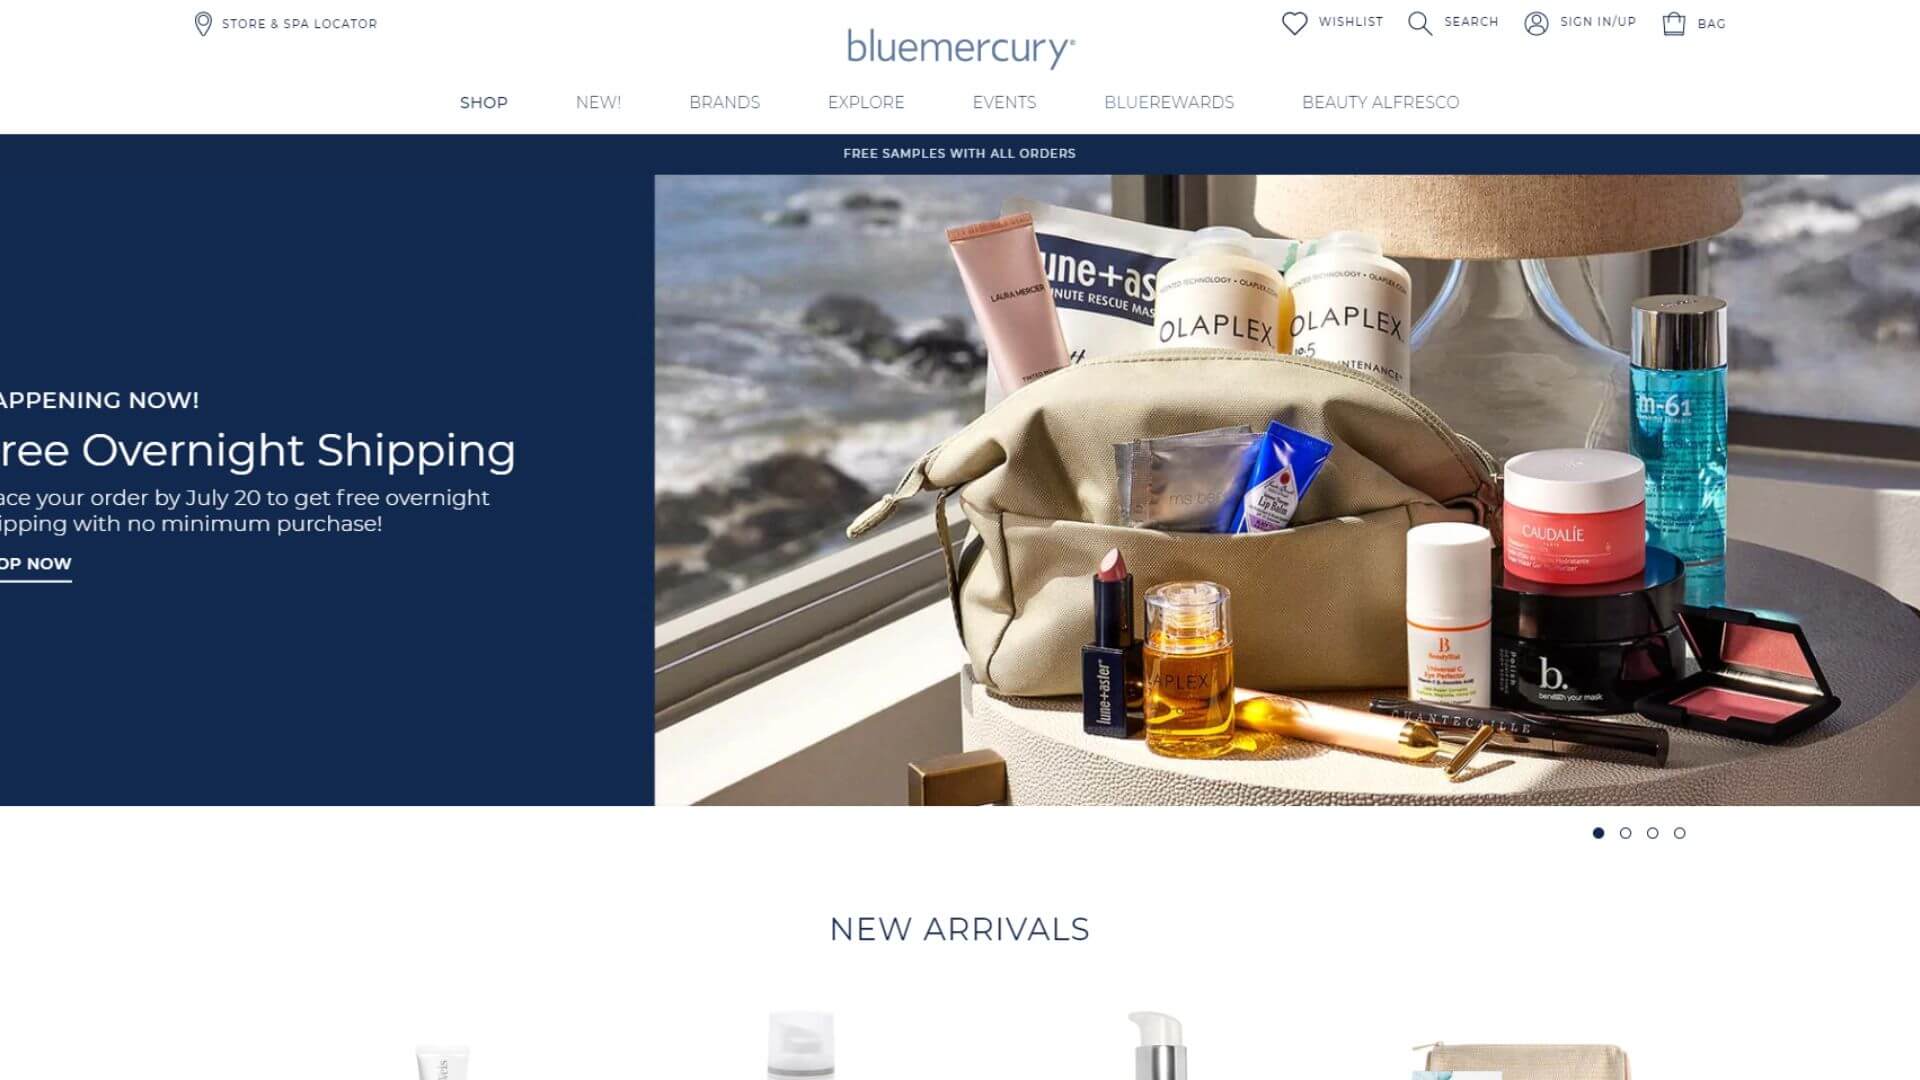 bluemercury beauty stores usa online retailers